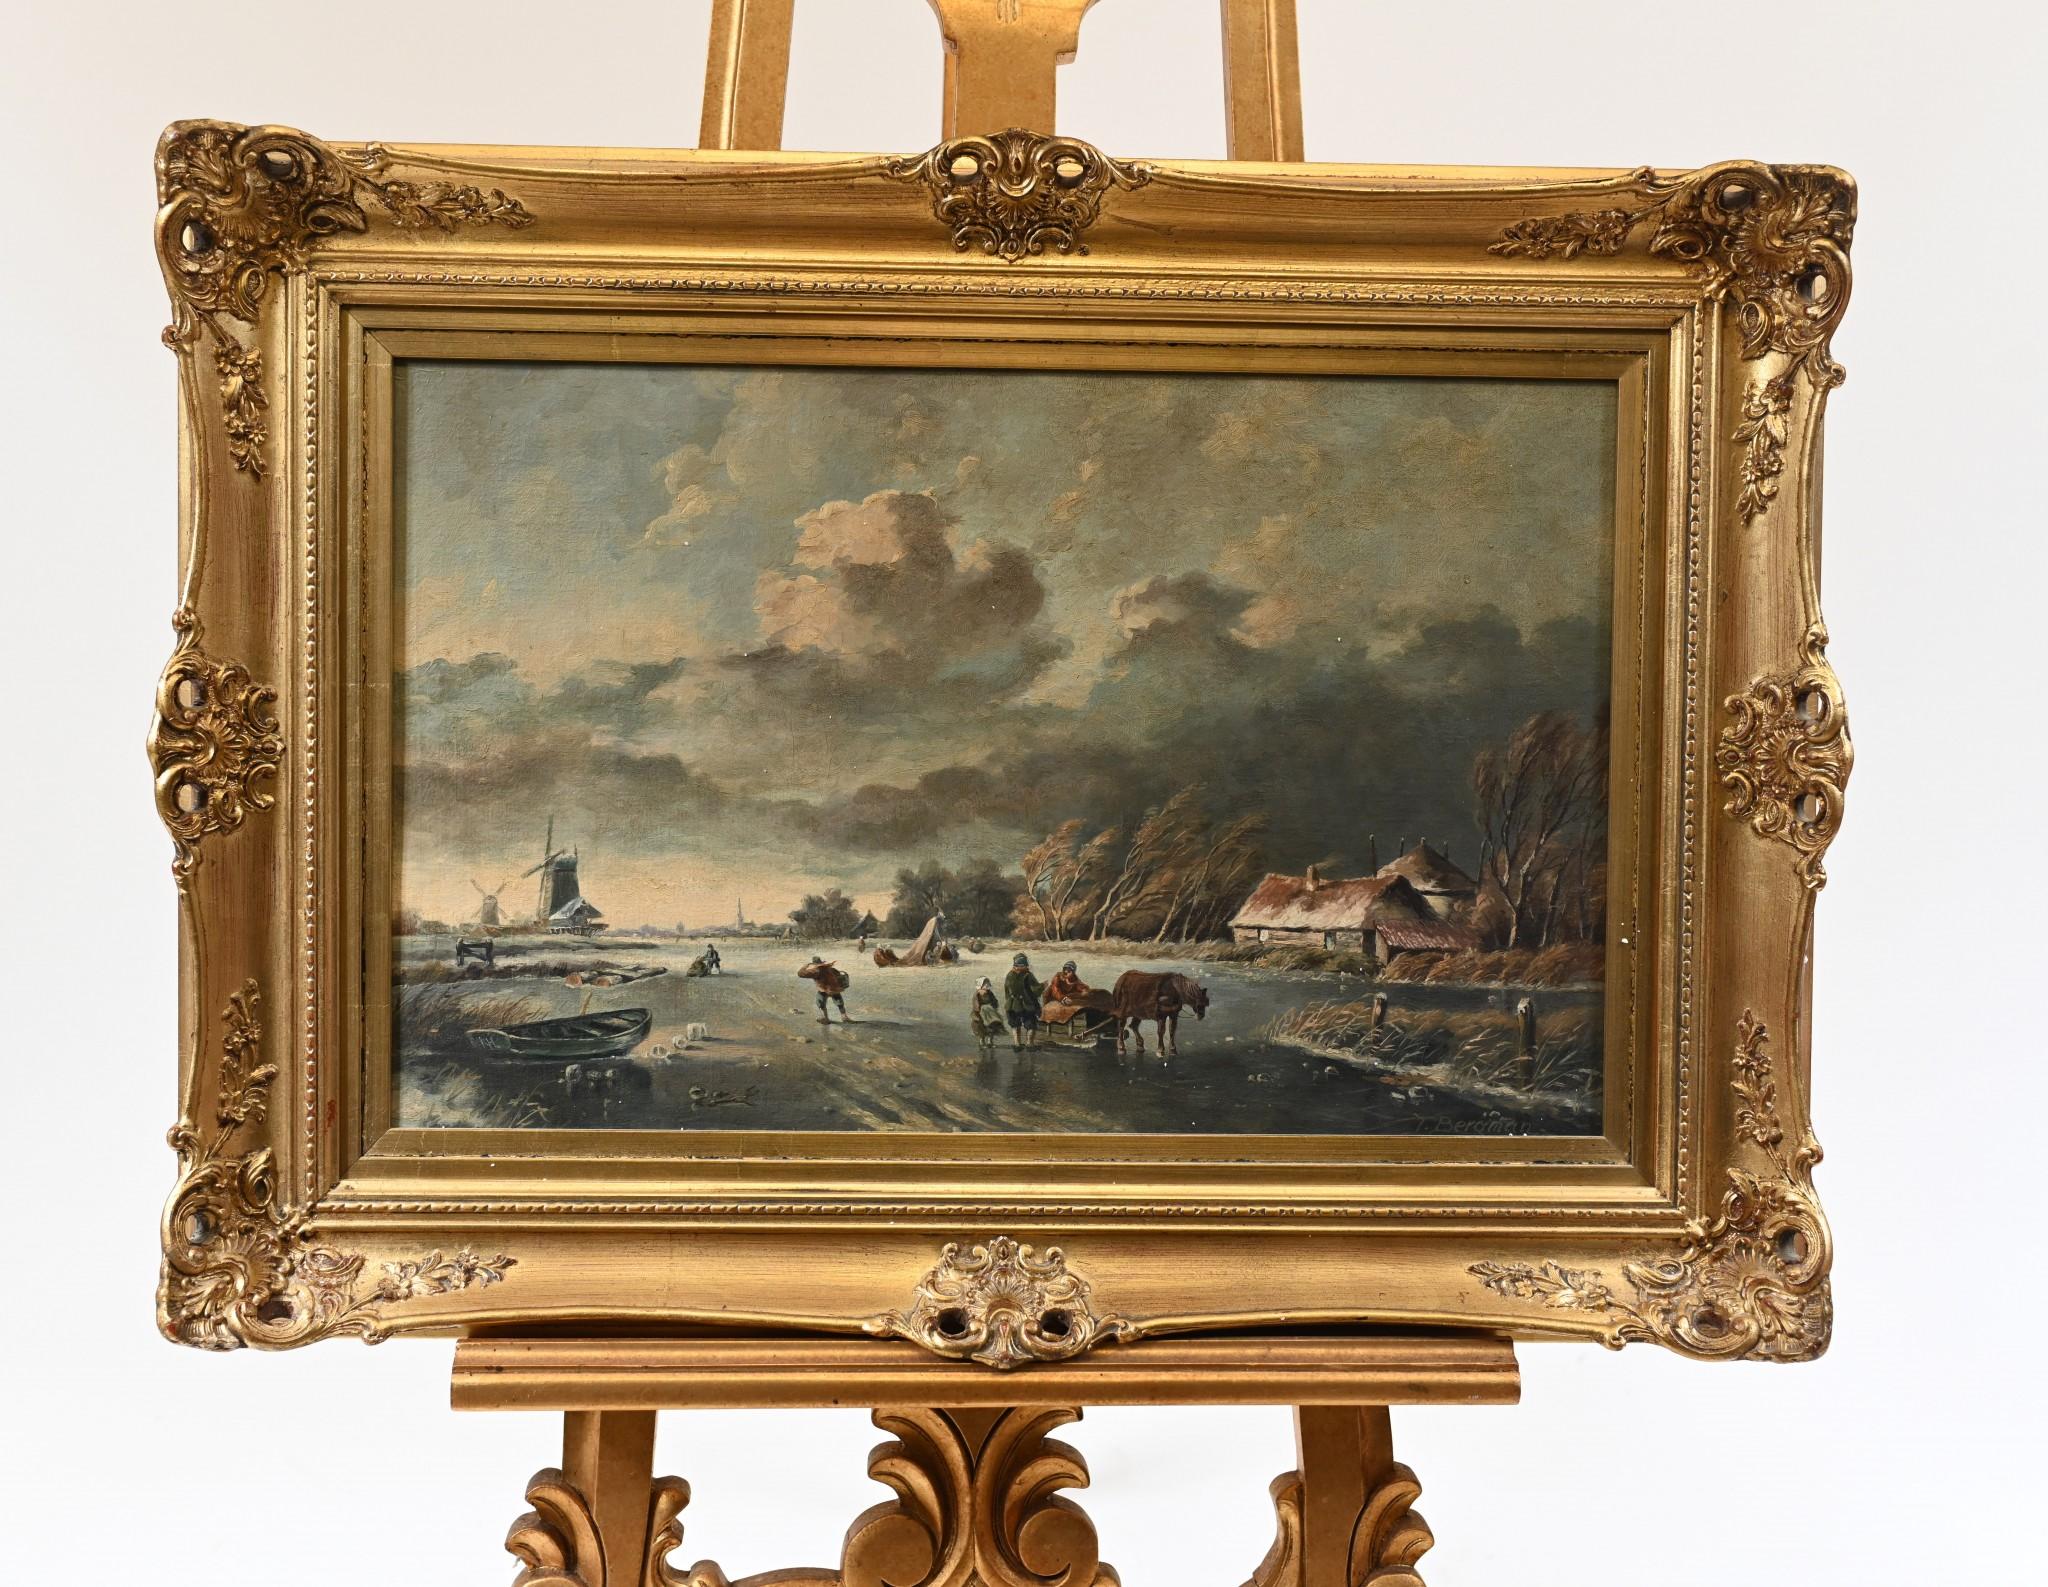 Gorgeous antique Dutch oil painting of a frozen landscape in Holland
The piece is signed T Bergman in the bottom right corner
Bergman has really captured the moody and frozen scene with great skill, look at the details to the brushwork
A sled